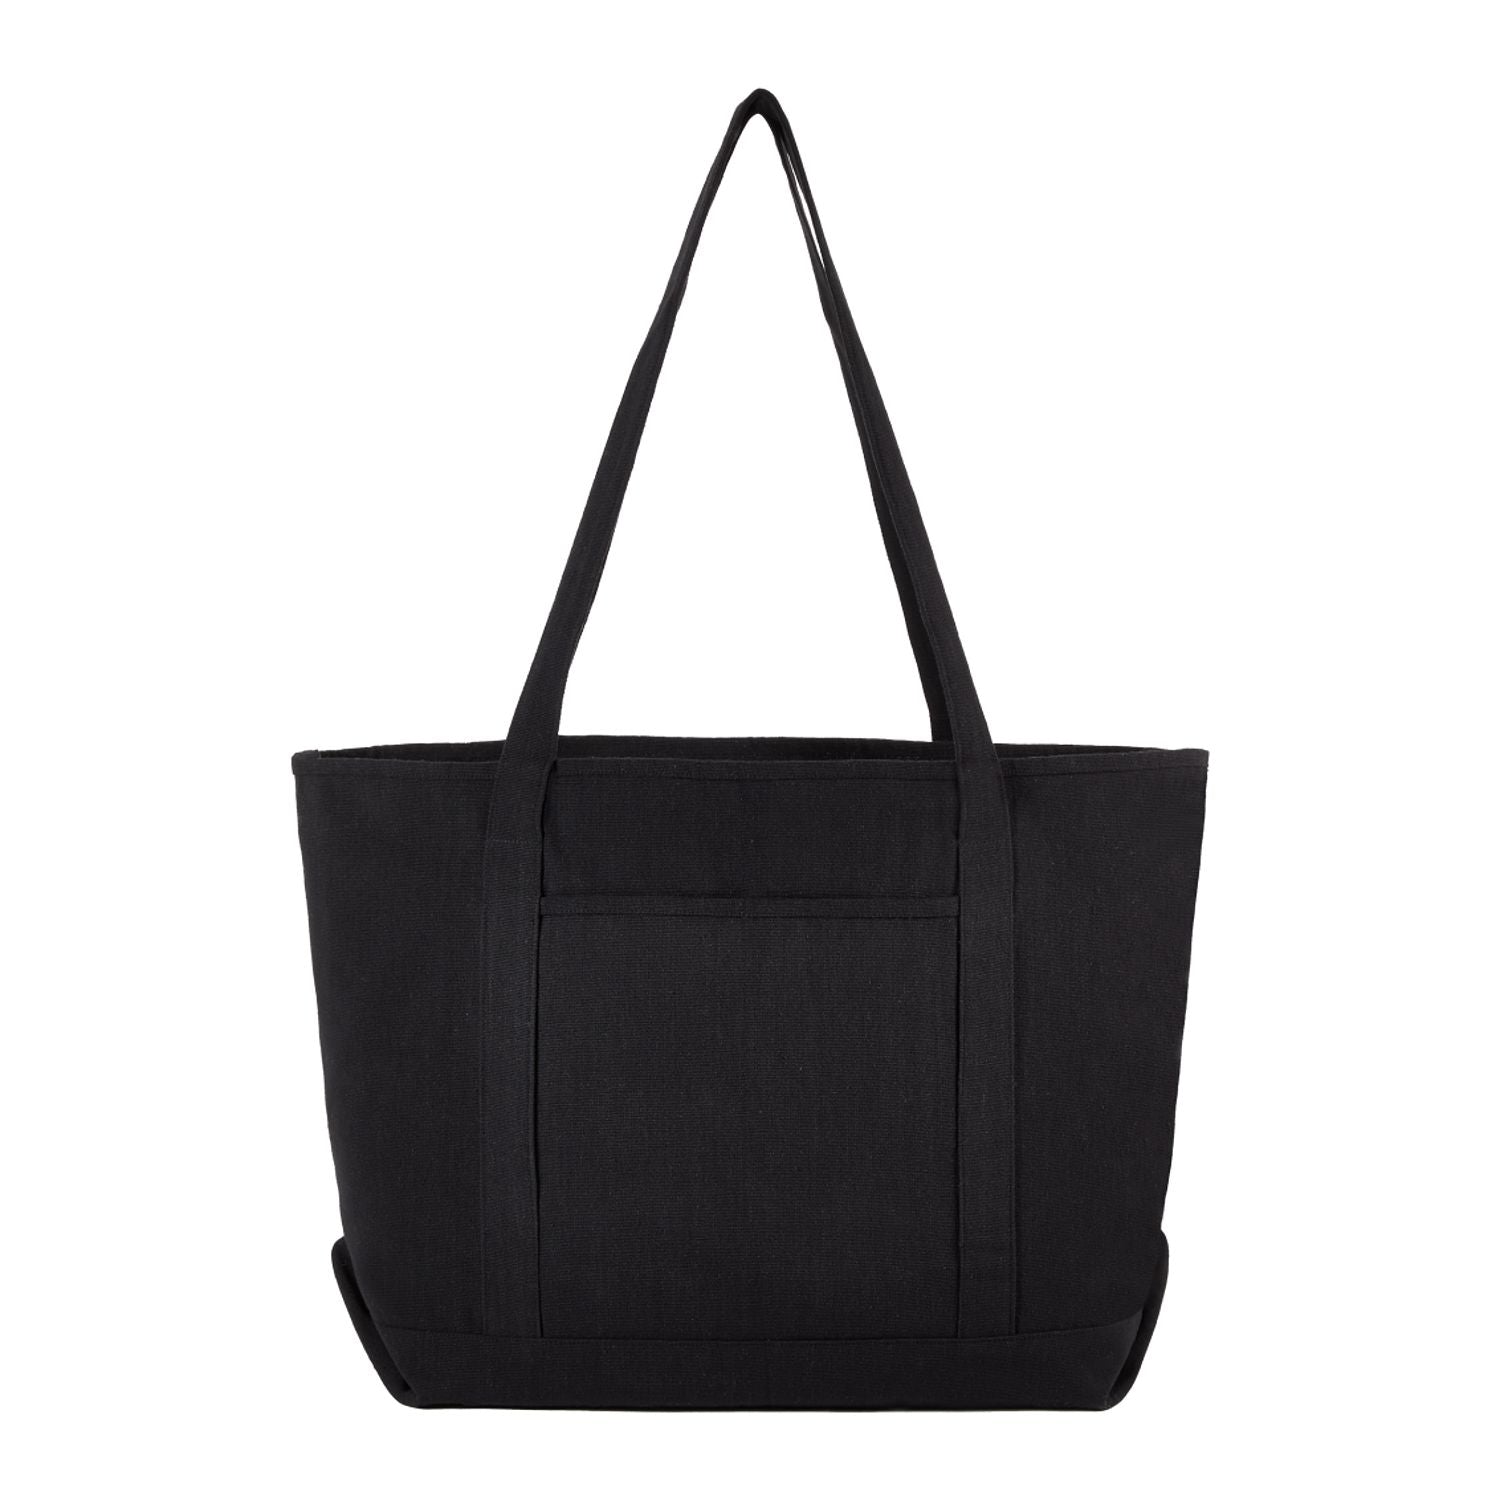 Customizable Repose 10oz Recycled Cotton Boat Tote in black.